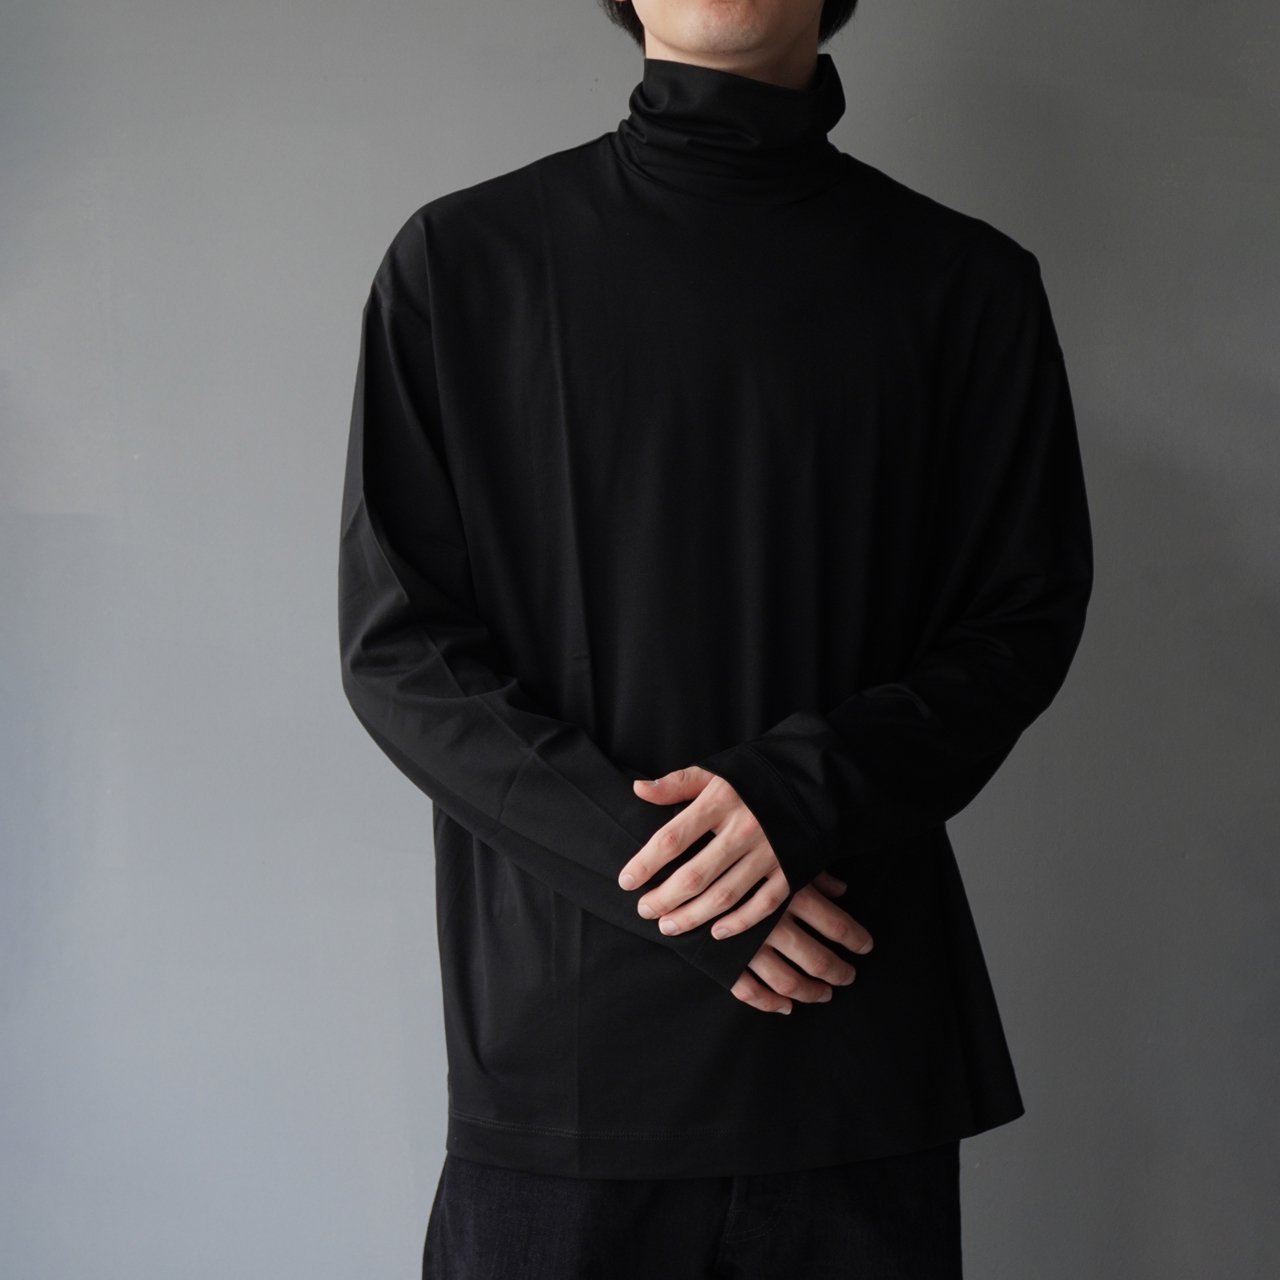 <img class='new_mark_img1' src='https://img.shop-pro.jp/img/new/icons5.gif' style='border:none;display:inline;margin:0px;padding:0px;width:auto;' />MARKAWARE (ޡ)COMFORT FIT TEE TURTLE NECK BLACK -ORGANIC GIZA 80/2 KNIT-